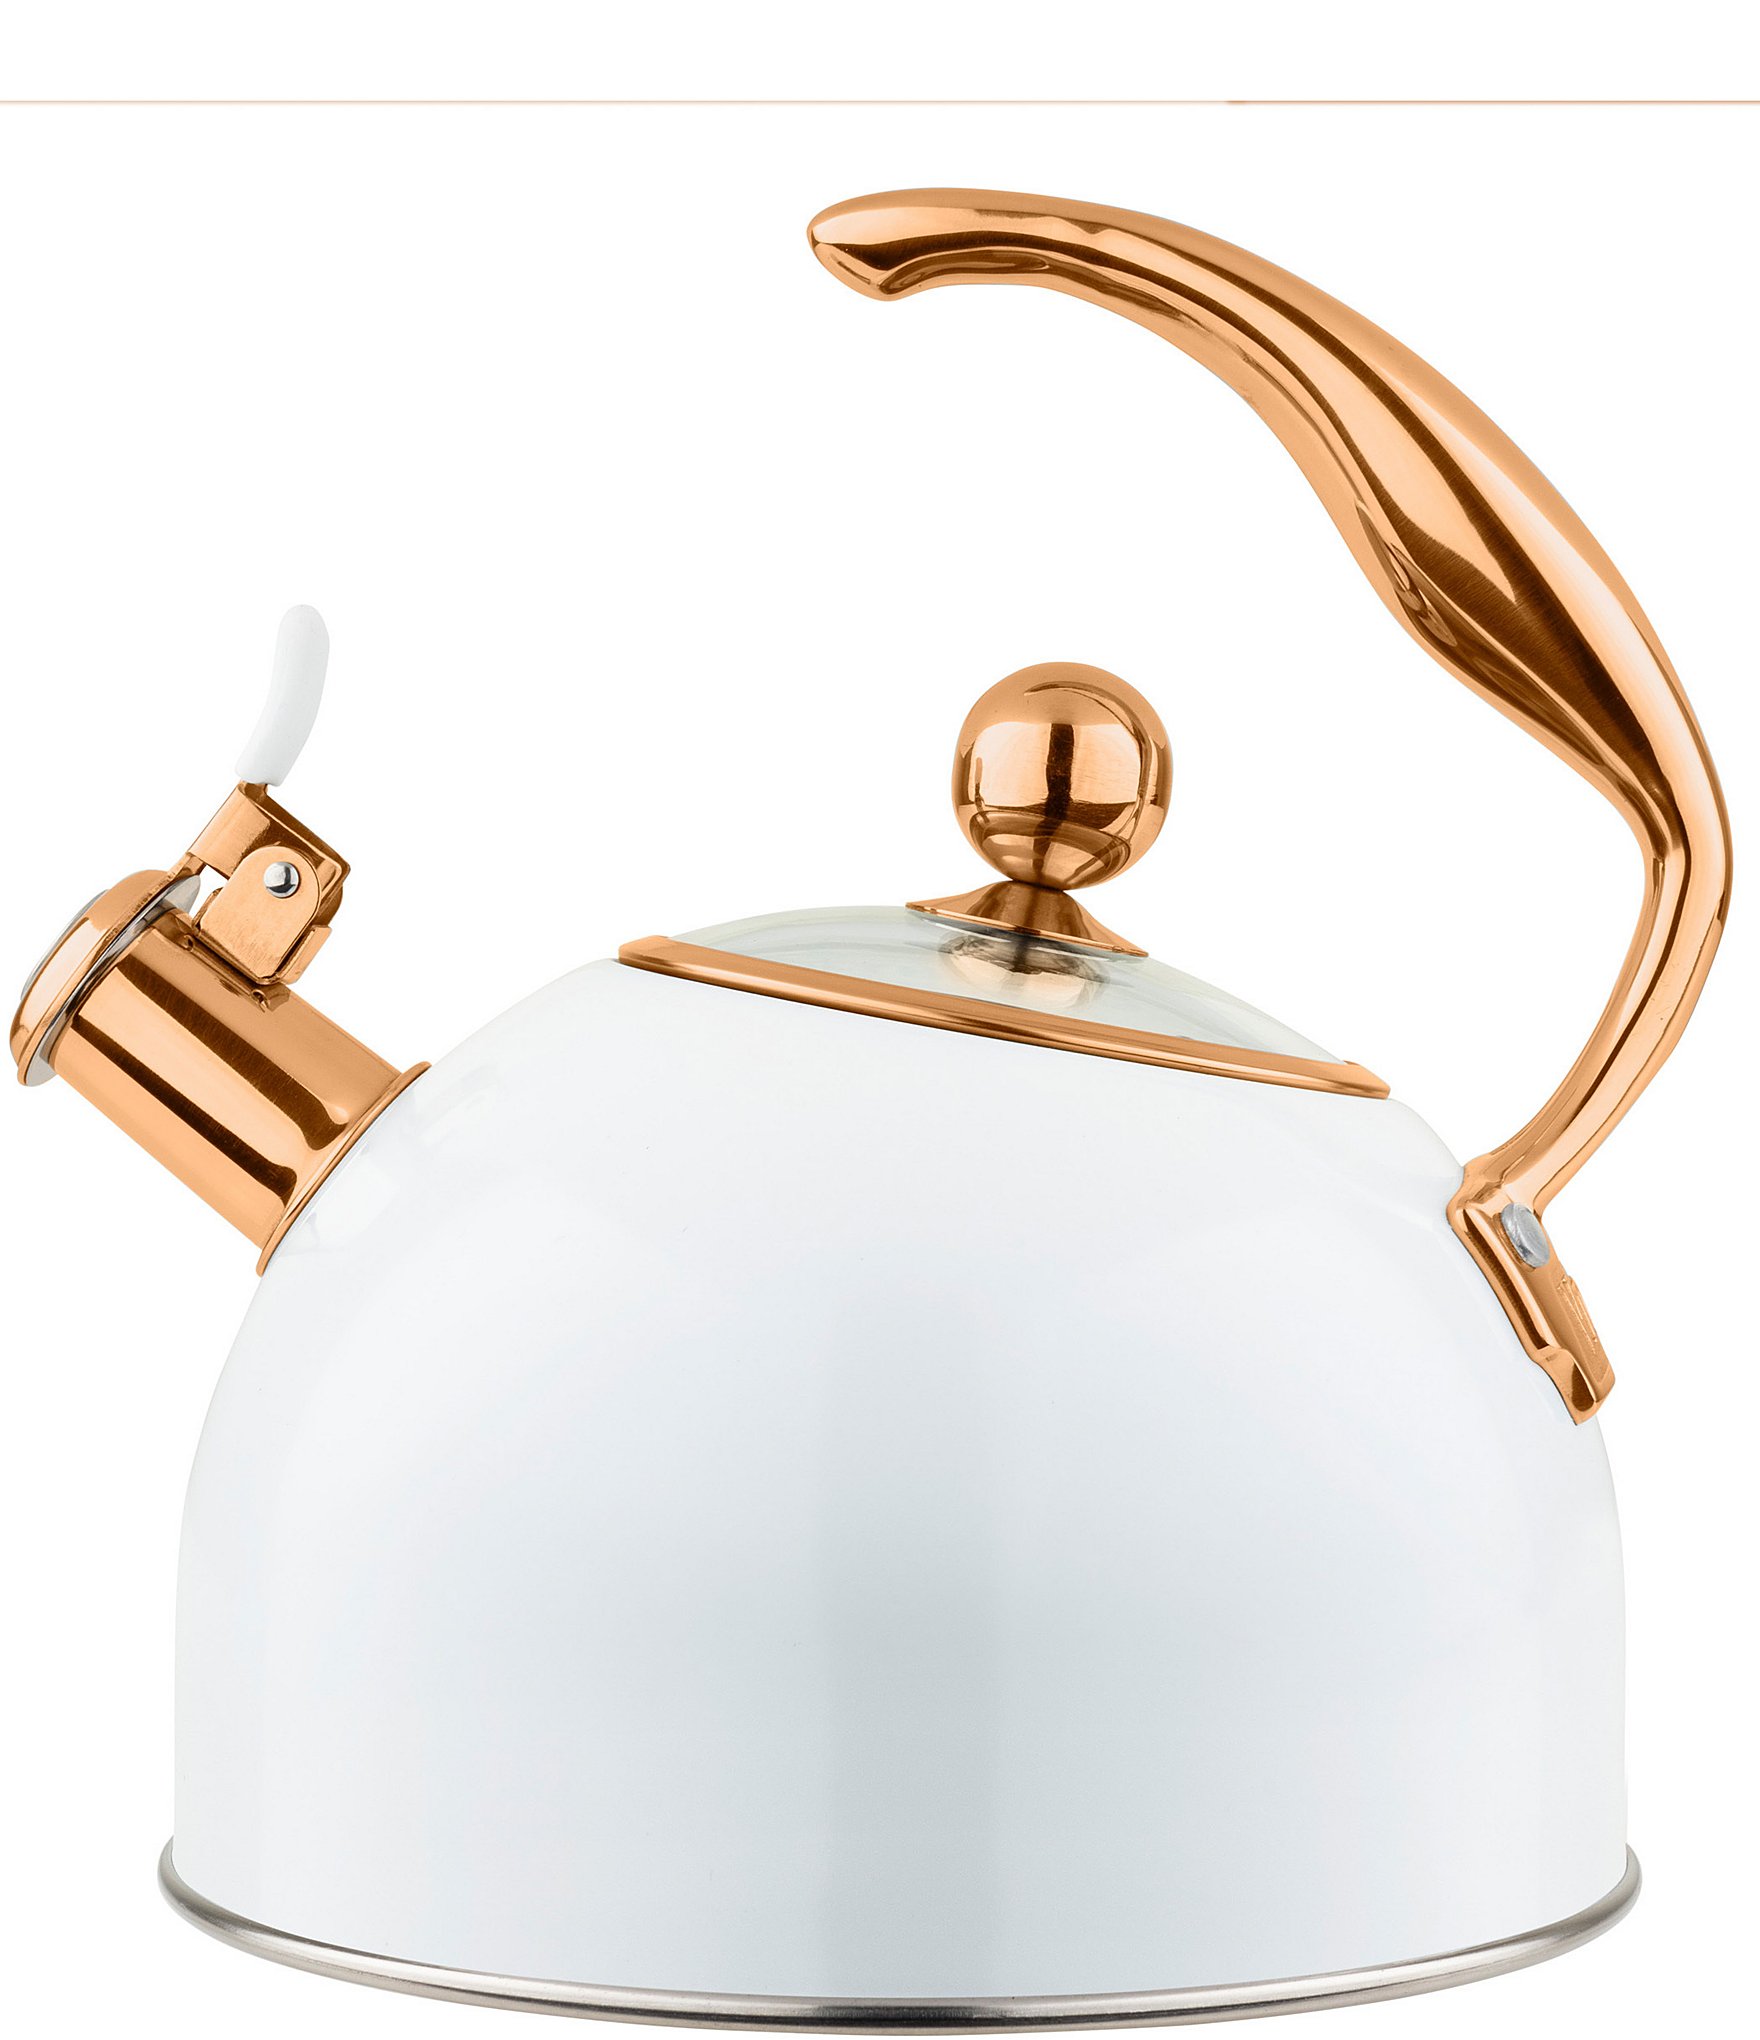 https://dimg.dillards.com/is/image/DillardsZoom/zoom/viking-2.6-quart-stainless-steel-whistling-kettle-with-3-ply-base-mirror-with-copper/00000000_zi_99cdd9b3-2dea-4d9c-95e8-1ee61dbd1dd7.jpg